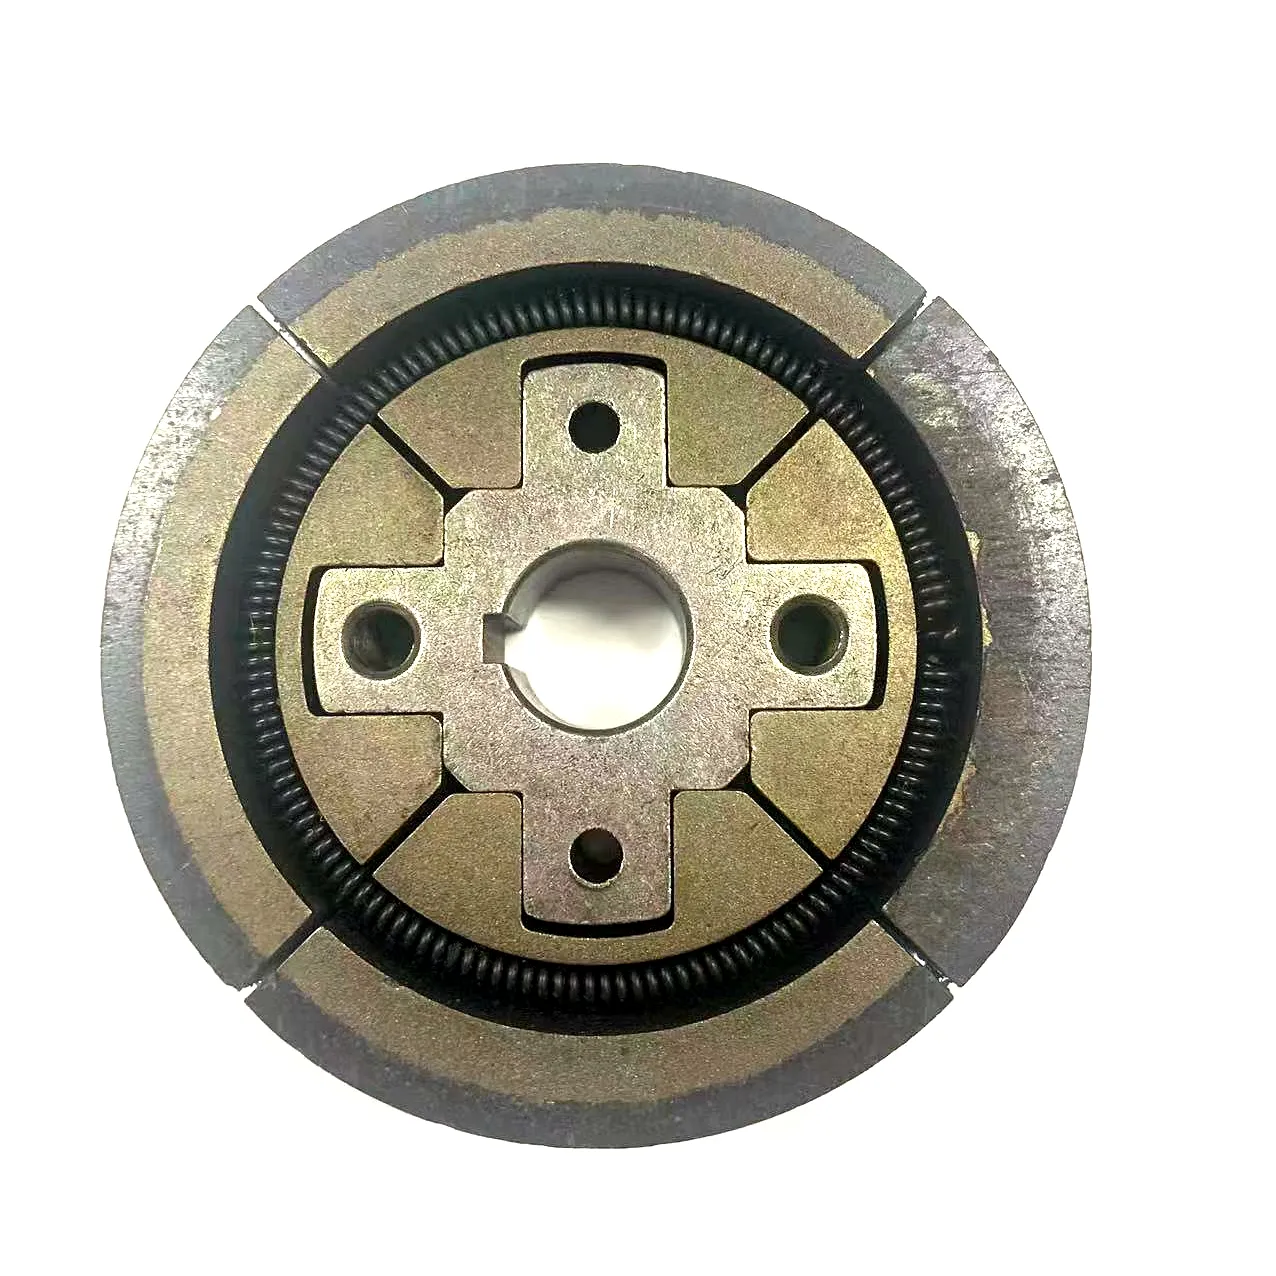 Tammping Rammer Clutch OD79 ID20 4 Disc For Gasoline Machinery engine parts